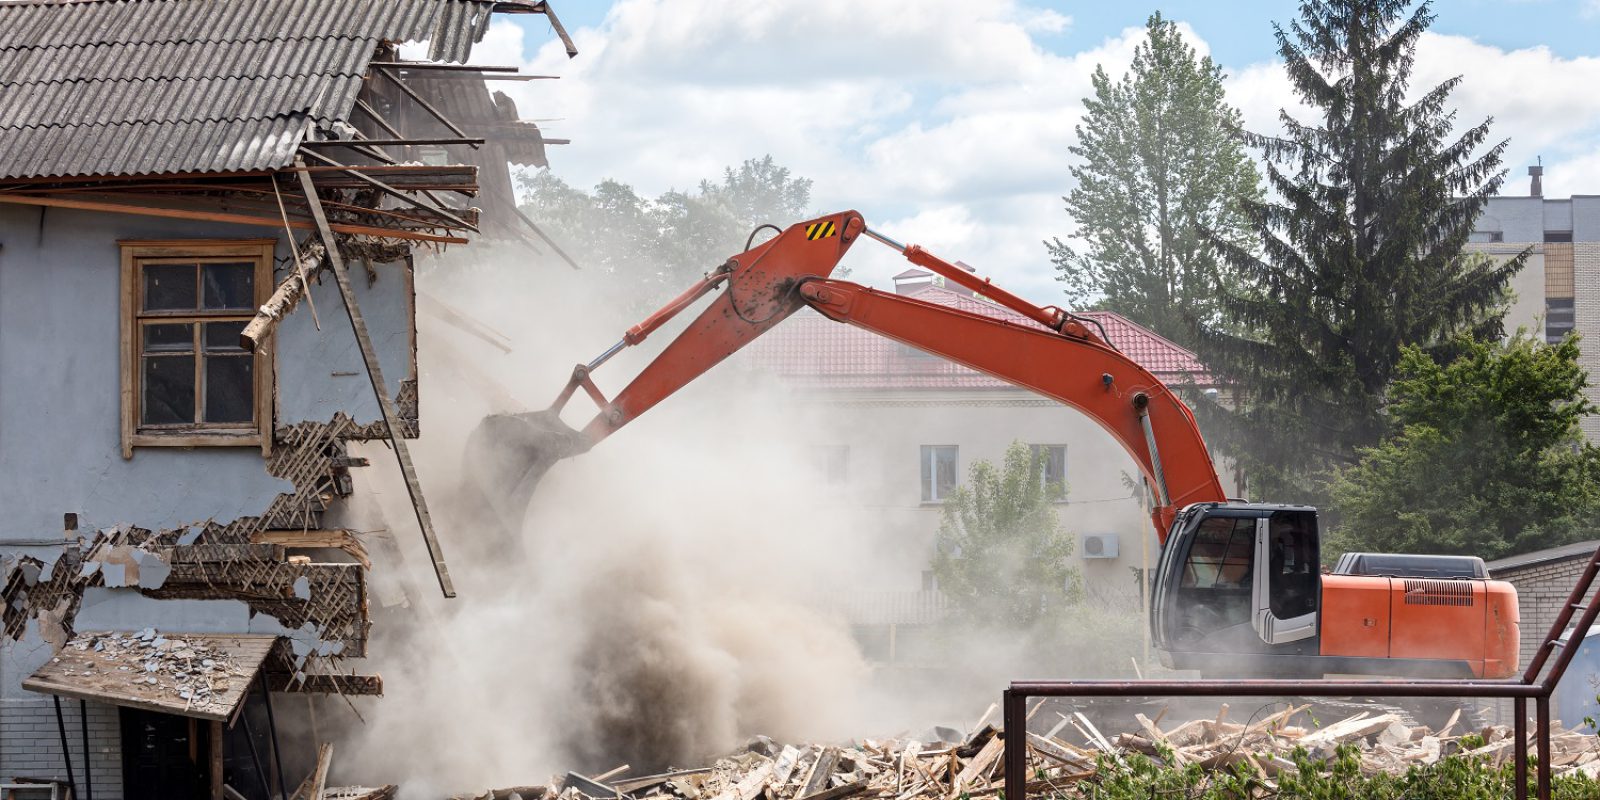 excavator working at the demolition of an old residential building